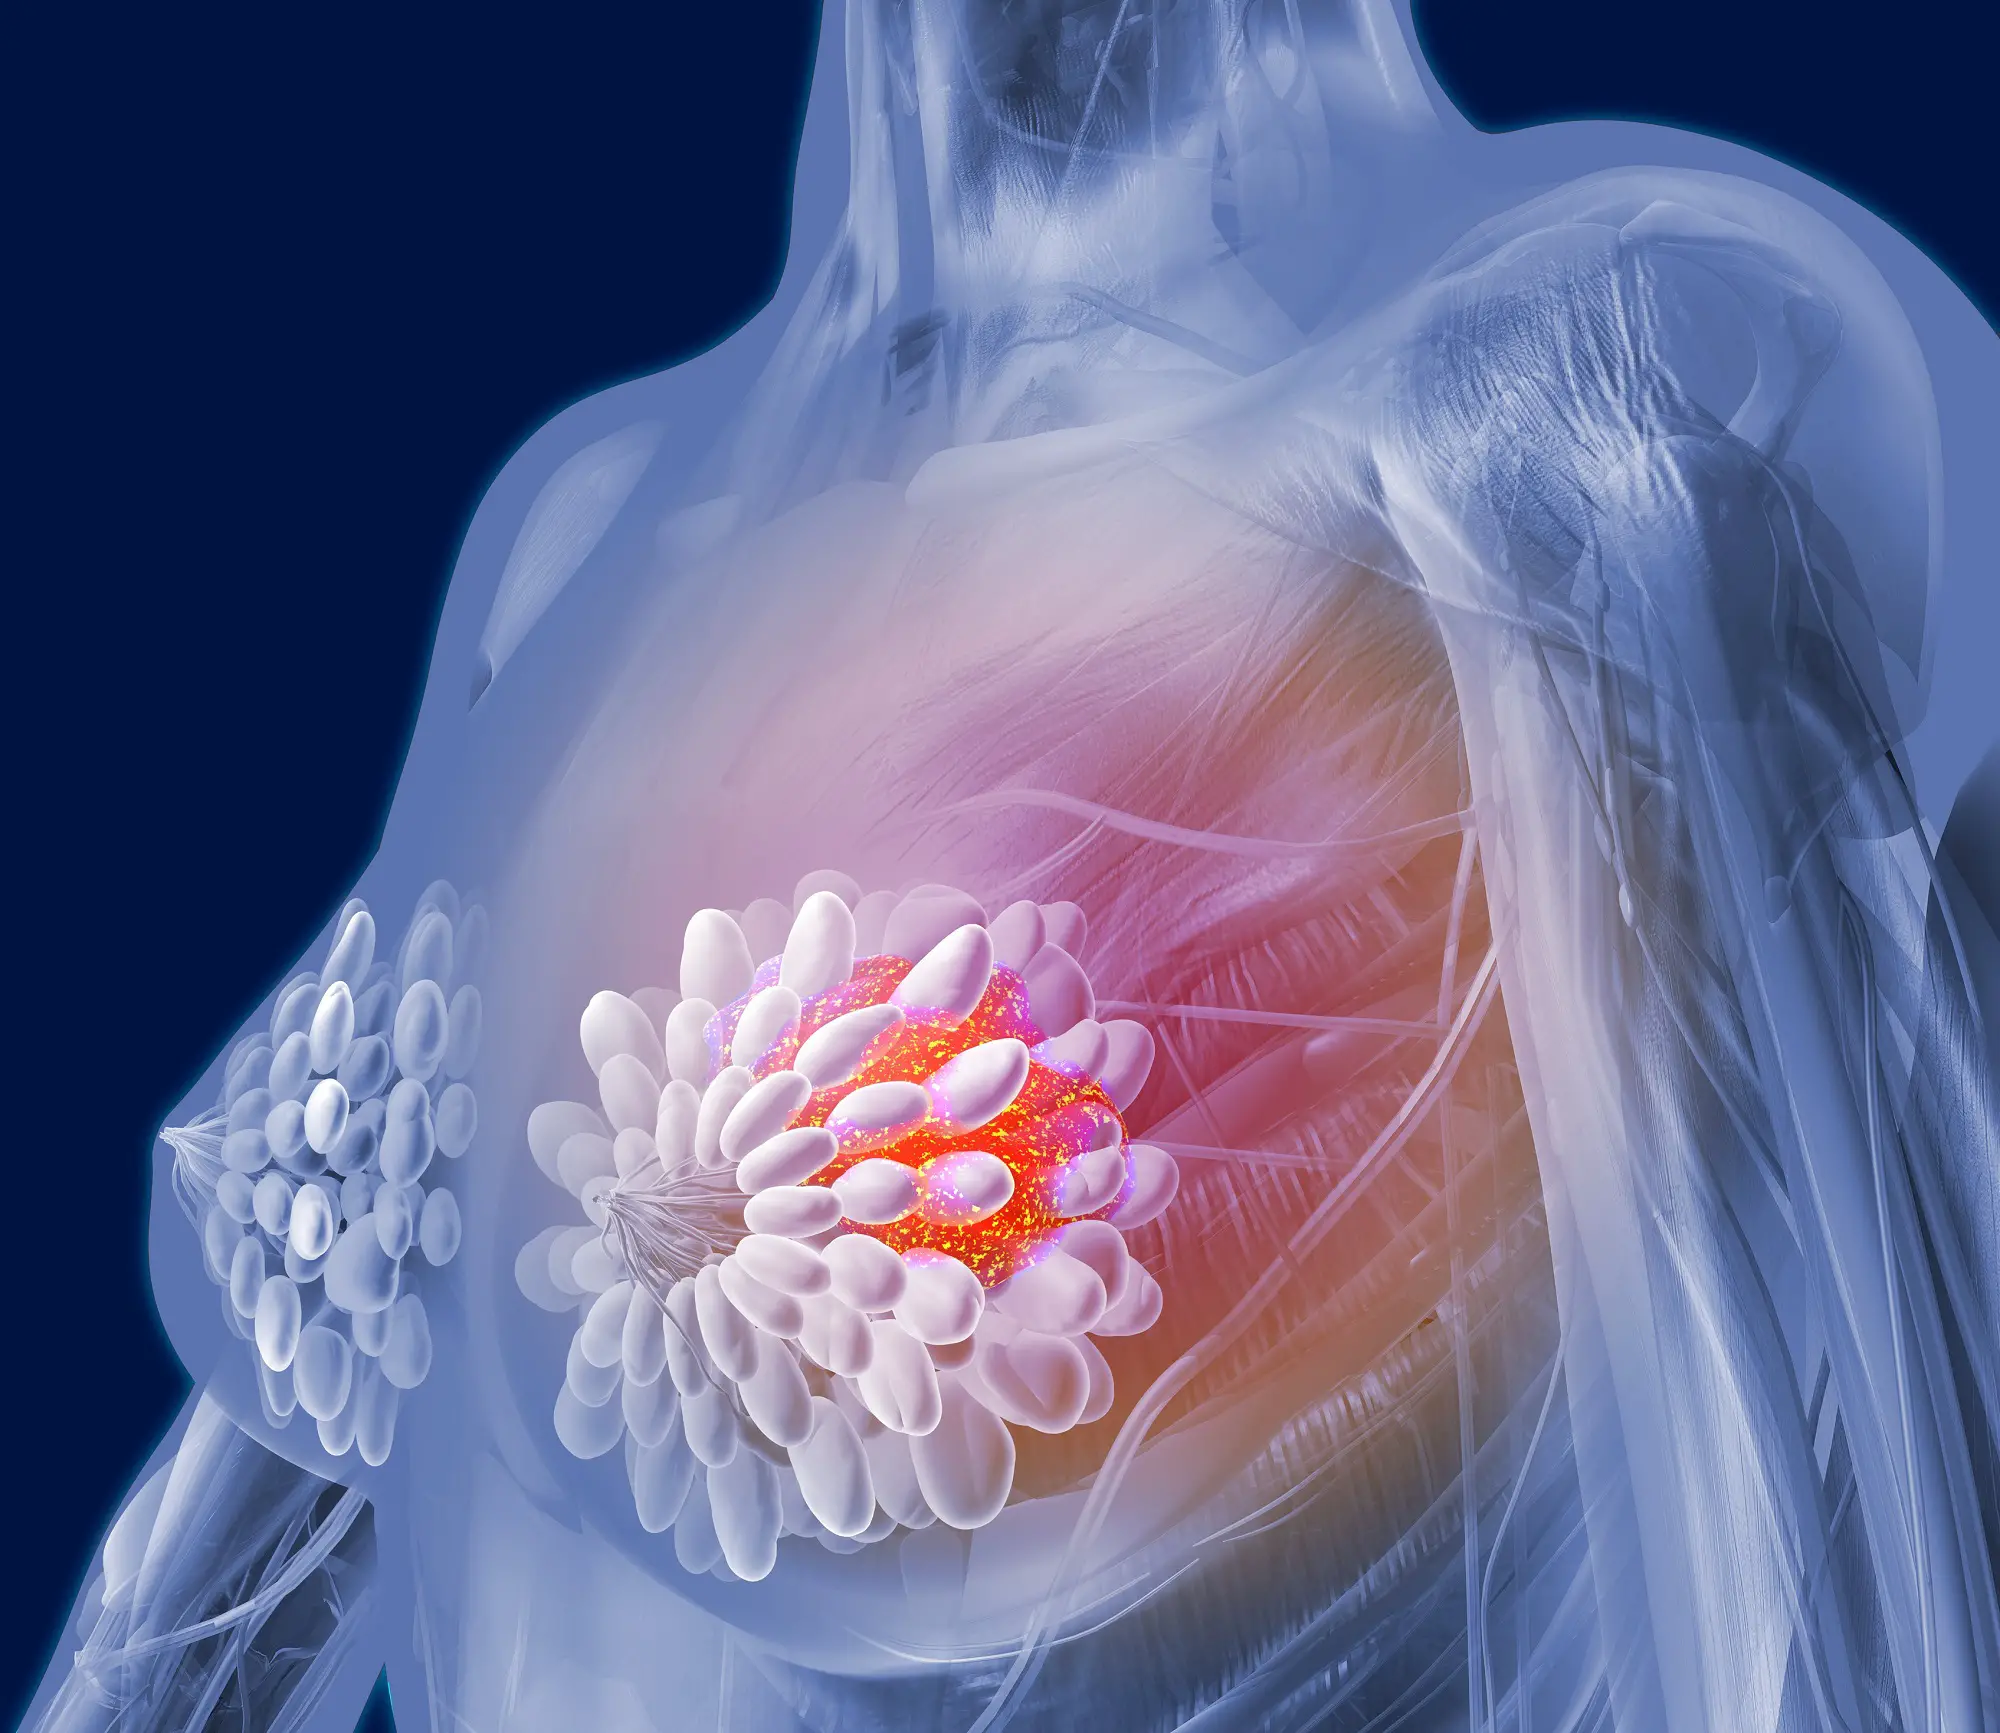 Prolonged PFS seen with ribociclib in premenopausal breast cancer